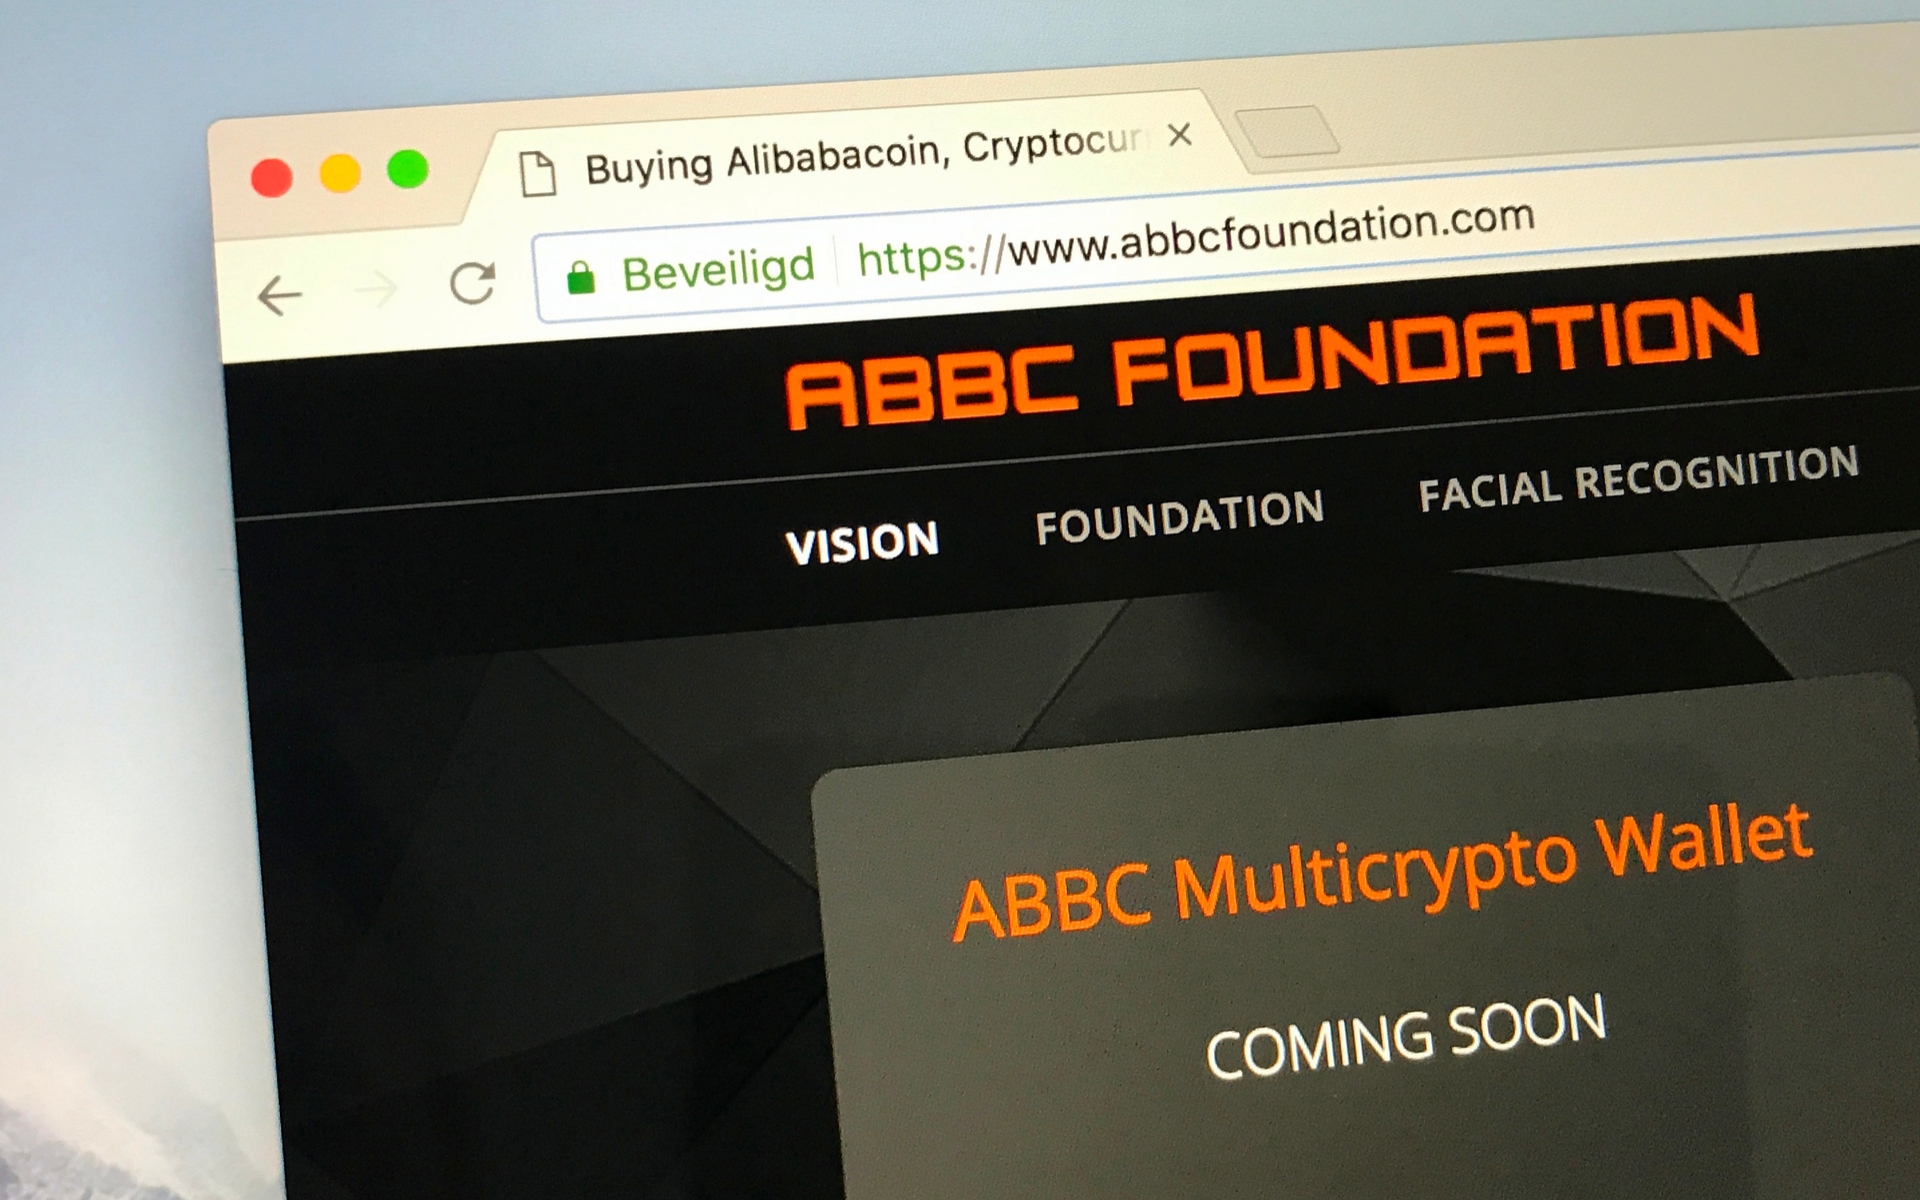 ABBC Foundation ends rumors of being bought by Alibaba Group, China